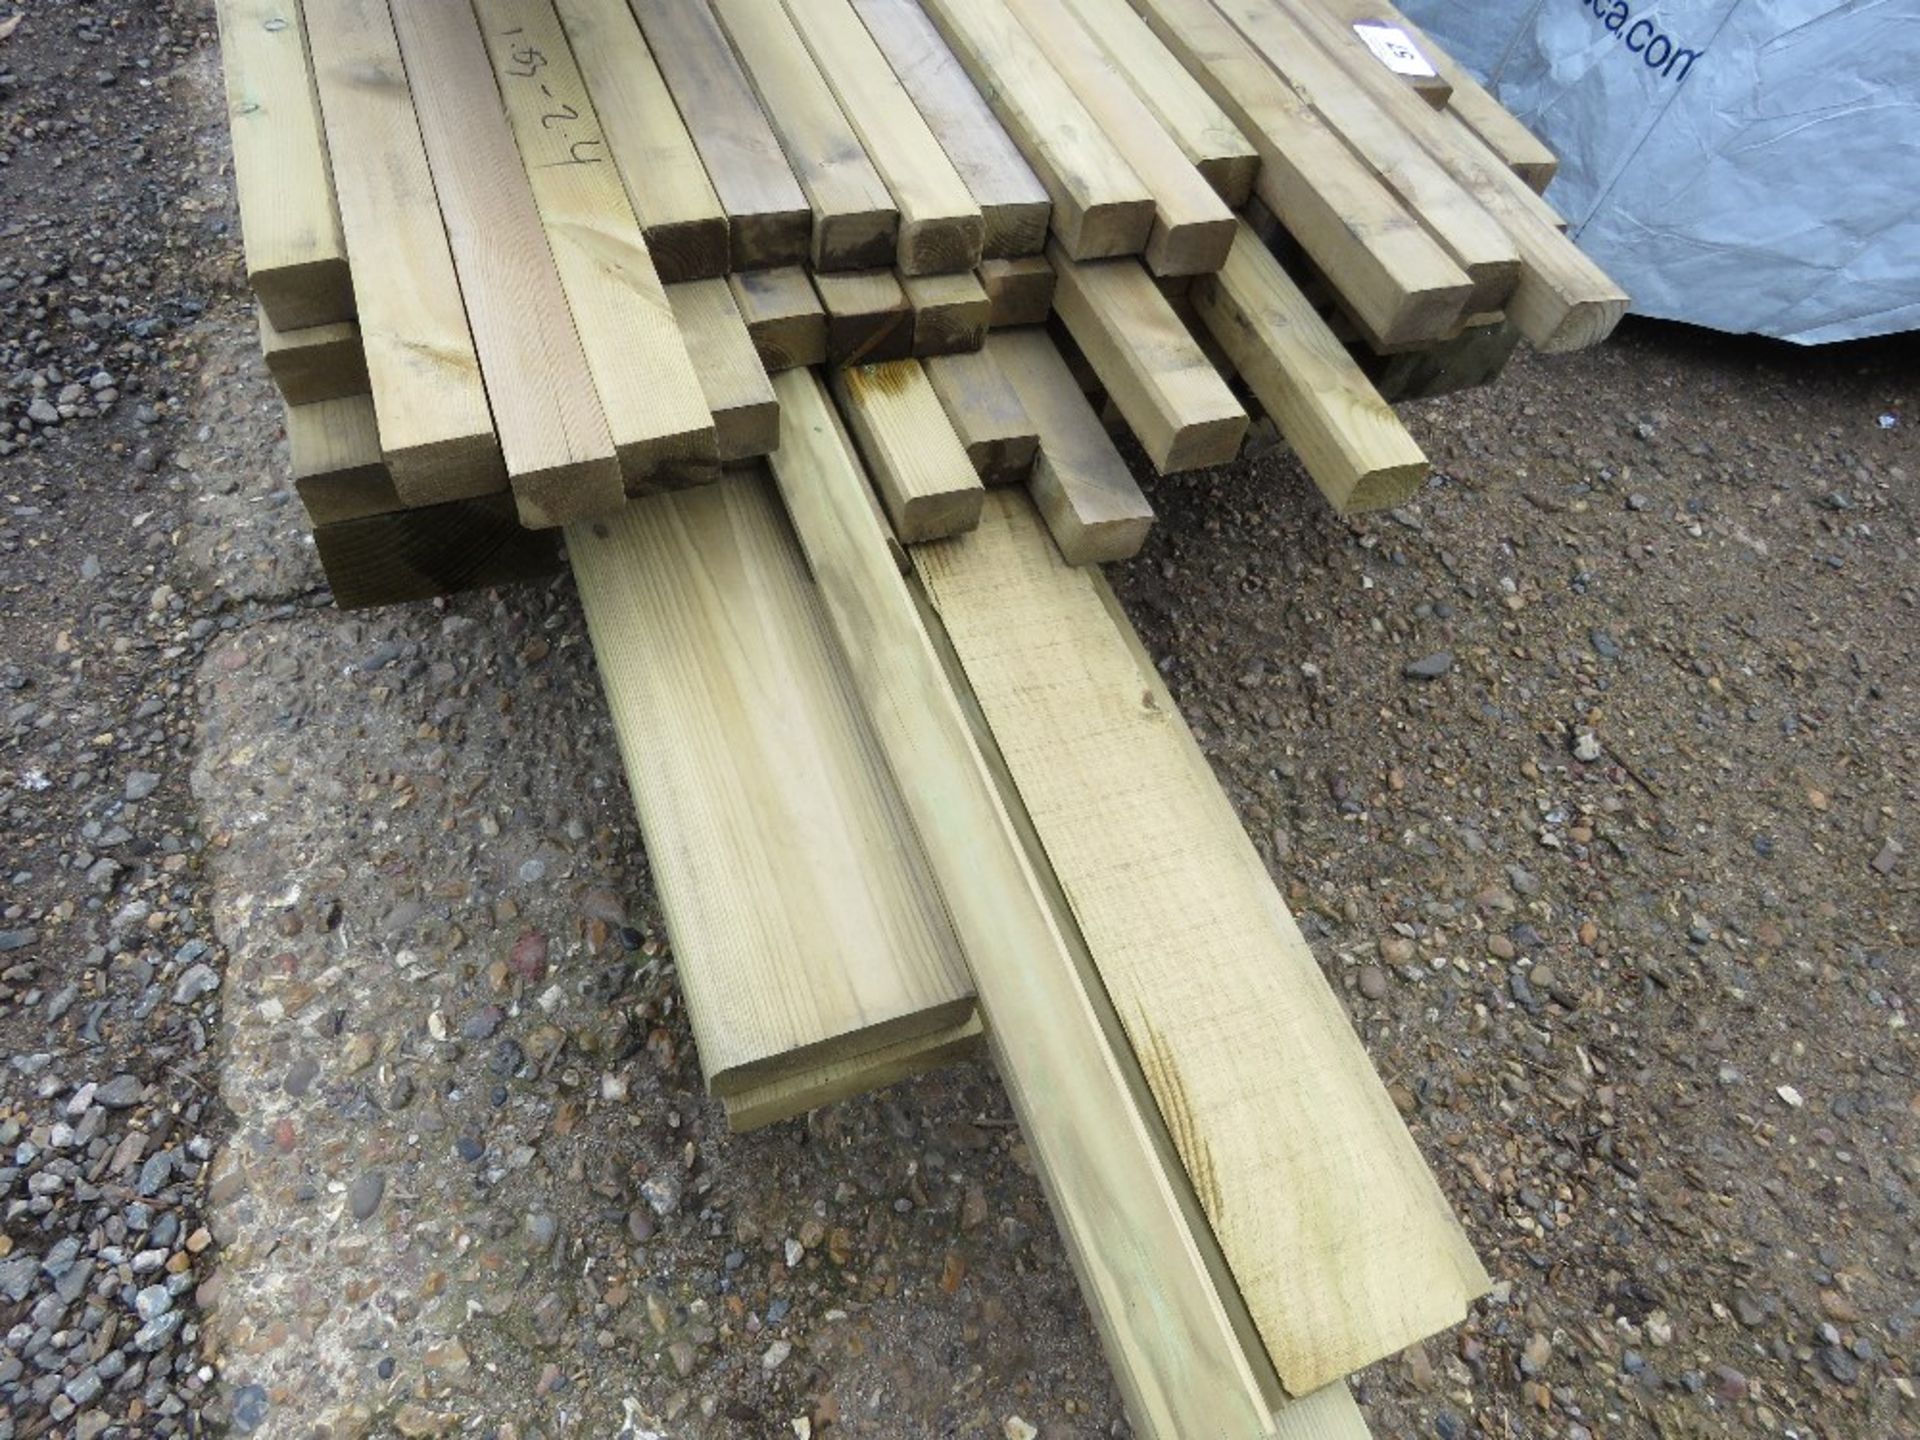 SMALL BUNDLE OF ASSORTED TREATED FENCING TIMBER 1.83M - 2.4M LENGTH APPROX. - Image 3 of 3